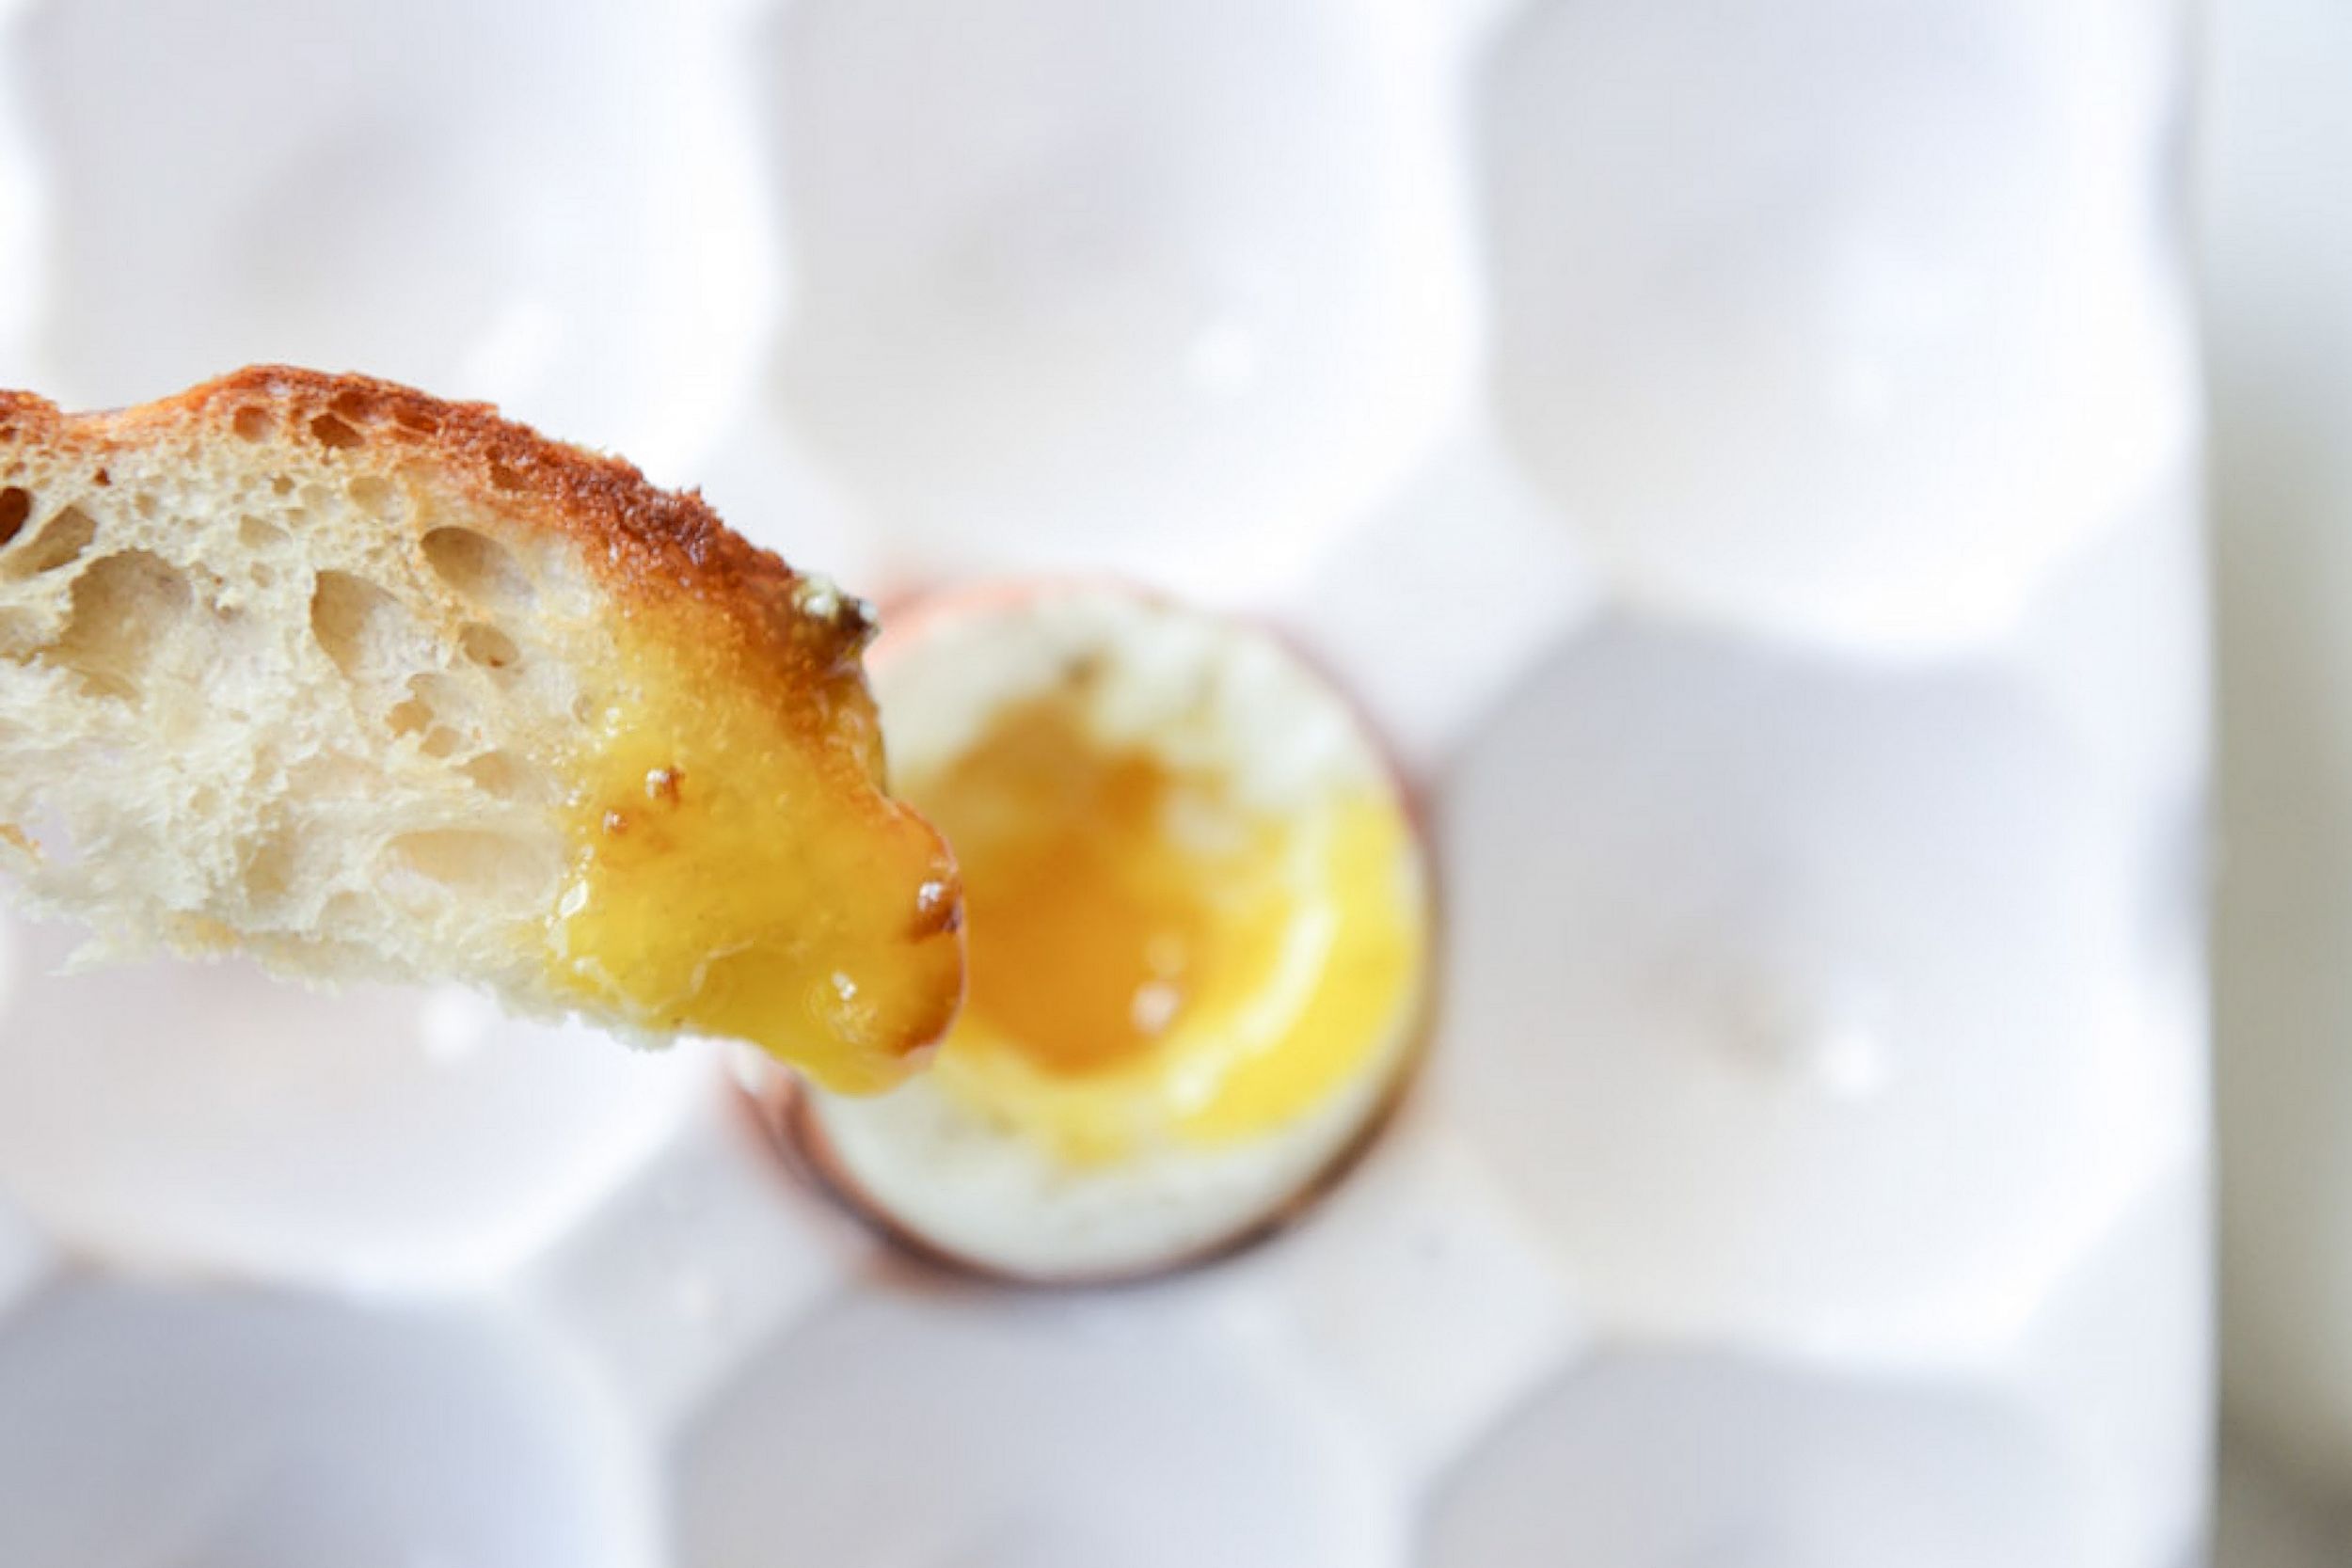 https://hips.hearstapps.com/thepioneerwoman/wp-content/uploads/2015/09/how-to-make-soft-boiled-eggs-06.jpg